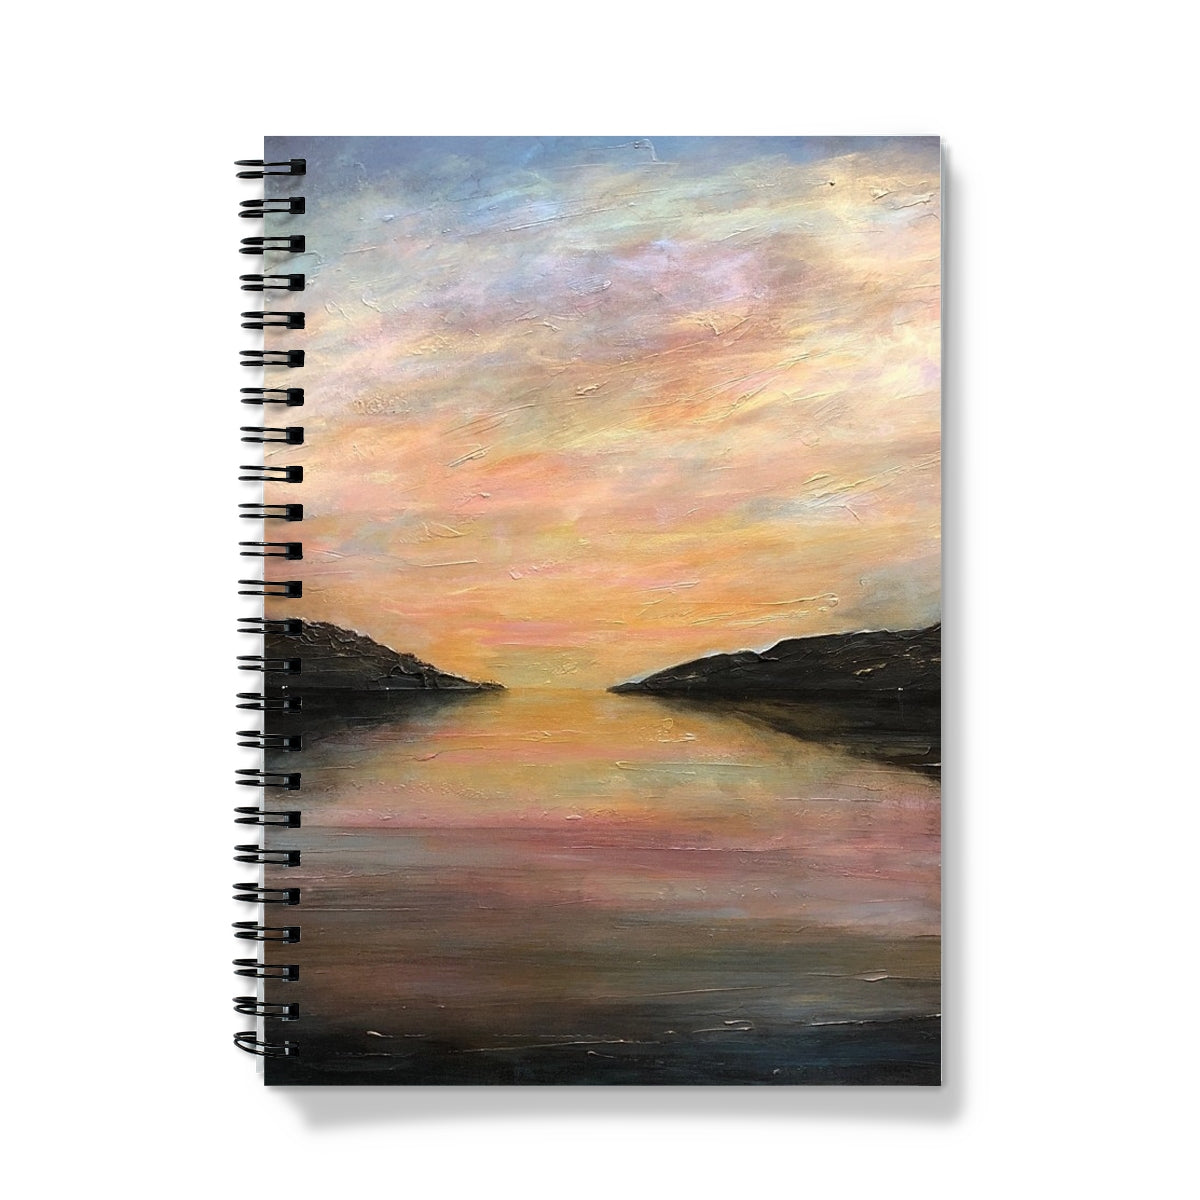 Loch Ness Glow Art Gifts Notebook-Journals & Notebooks-Scottish Lochs & Mountains Art Gallery-A5-Graph-Paintings, Prints, Homeware, Art Gifts From Scotland By Scottish Artist Kevin Hunter